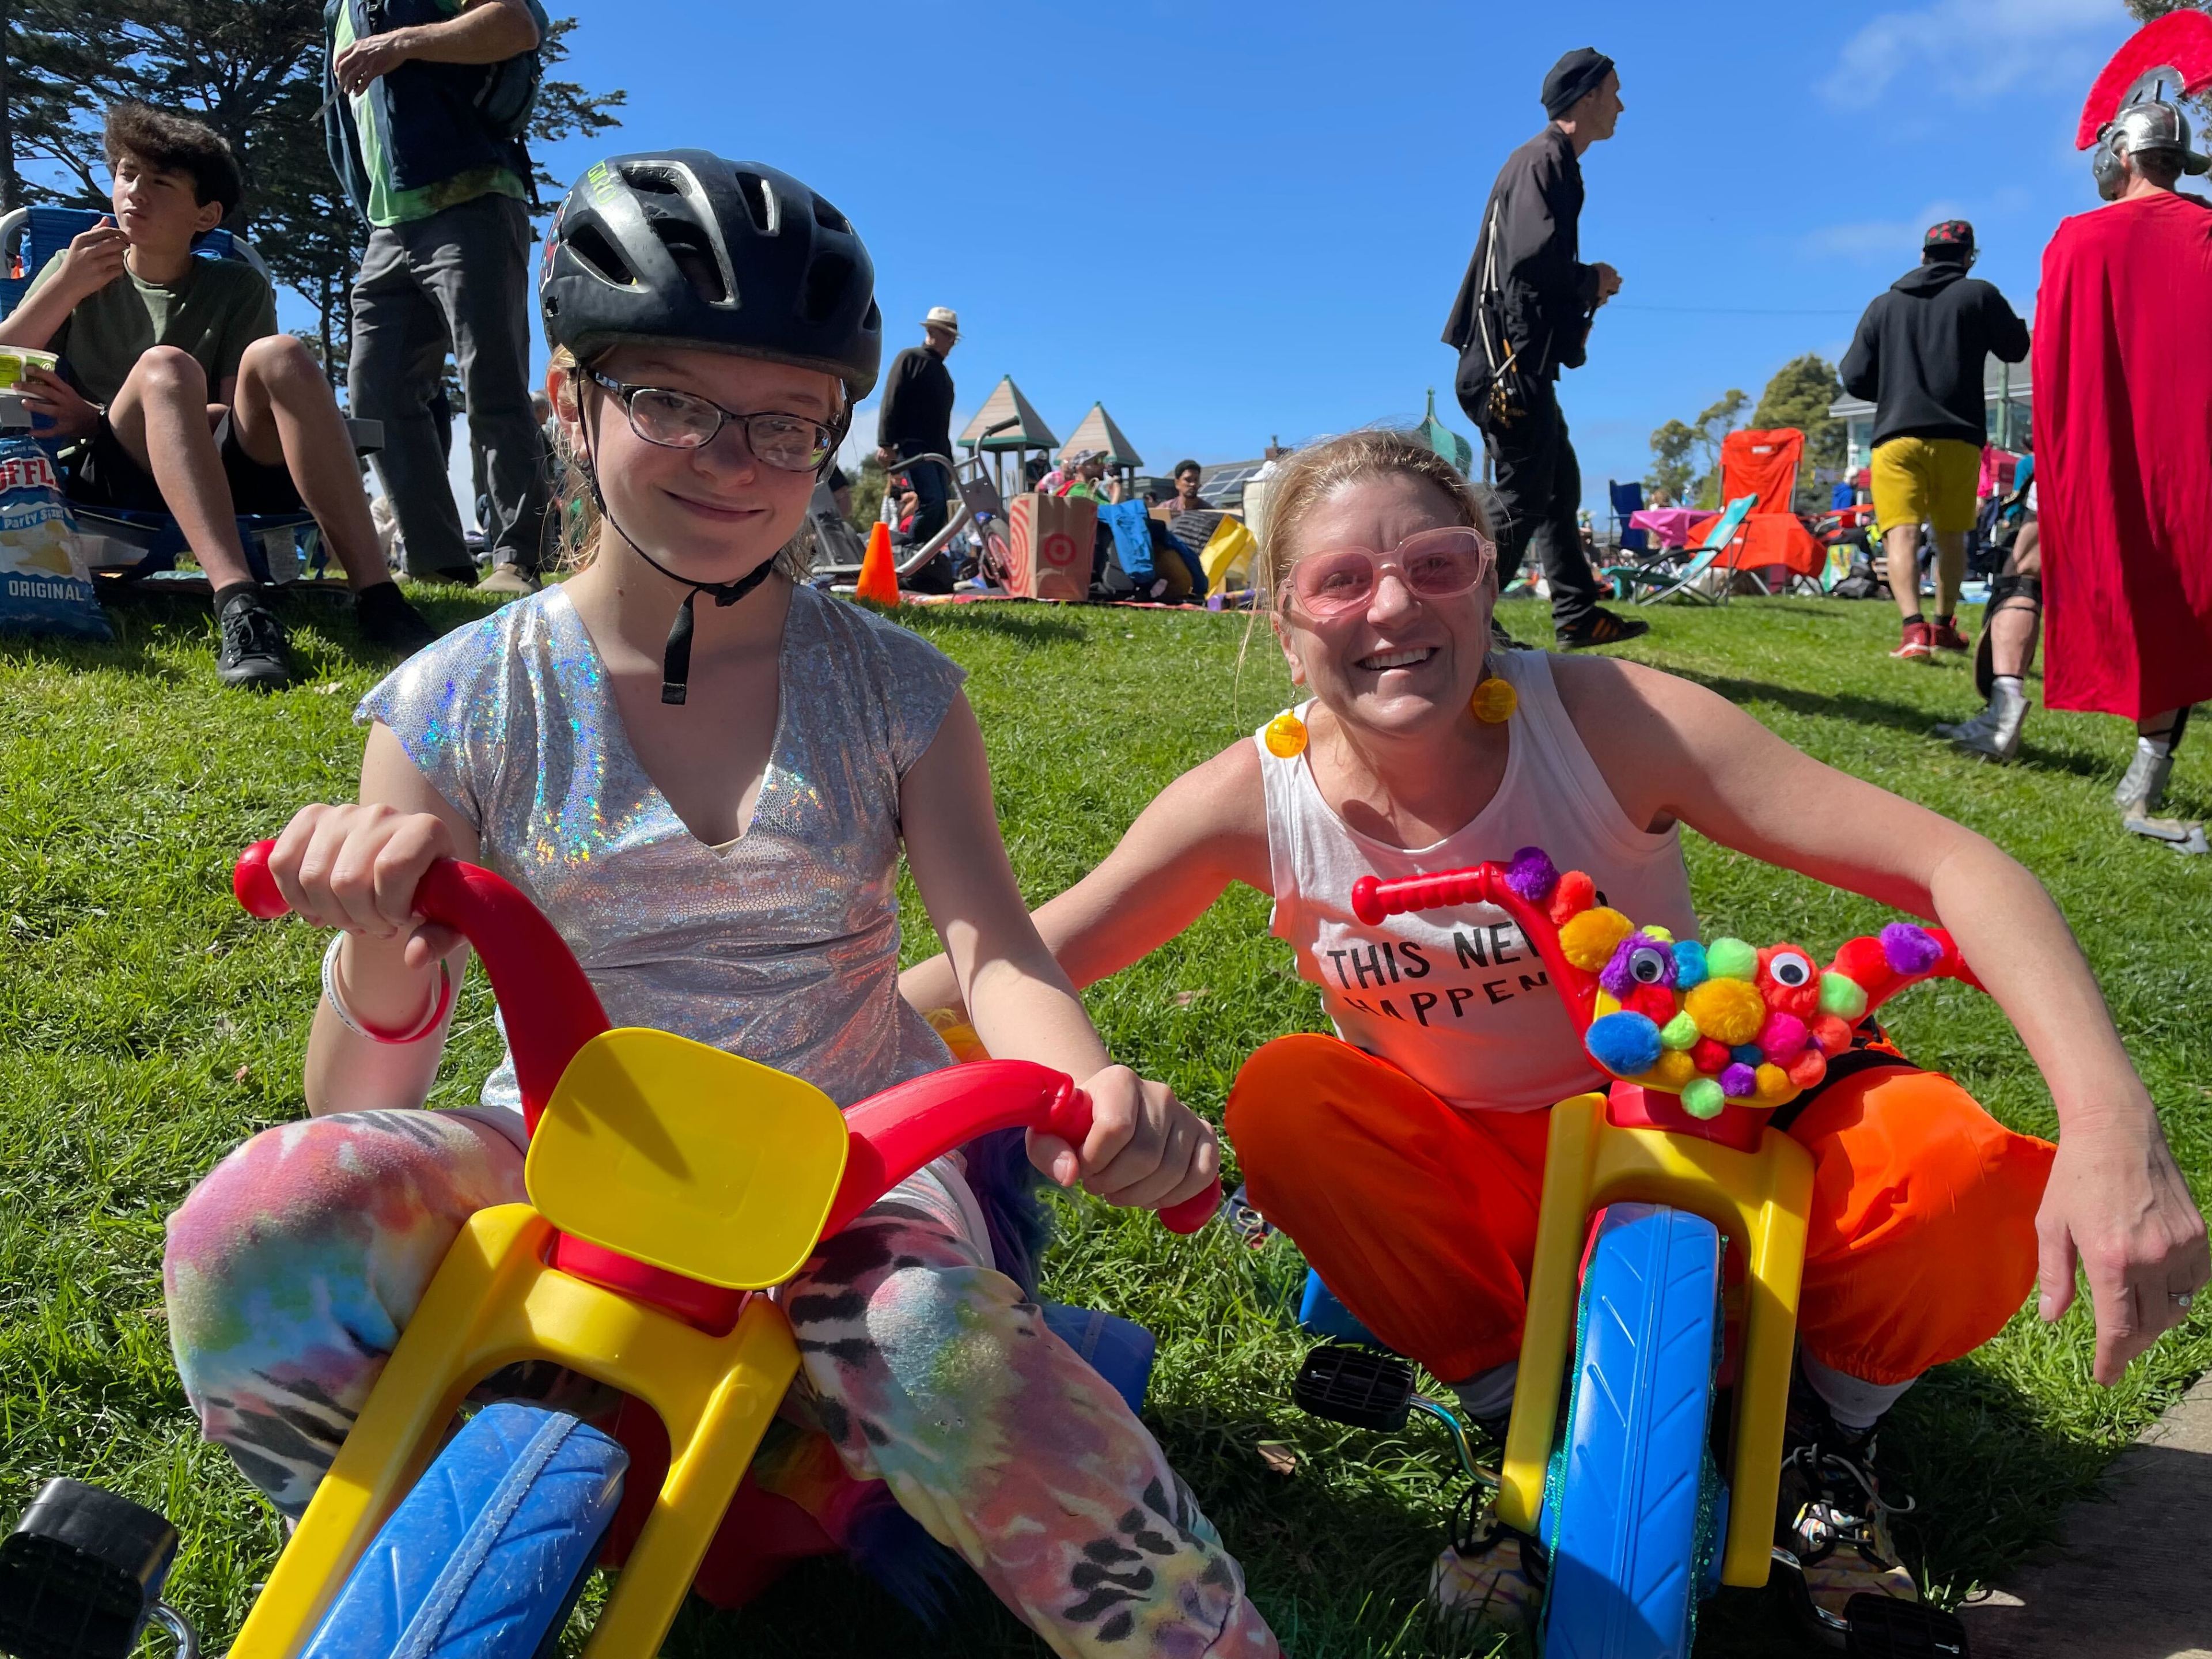 Two people are smiling on a sunny day, one on a small toy bike, both wearing colorful, quirky outfits and helmets.